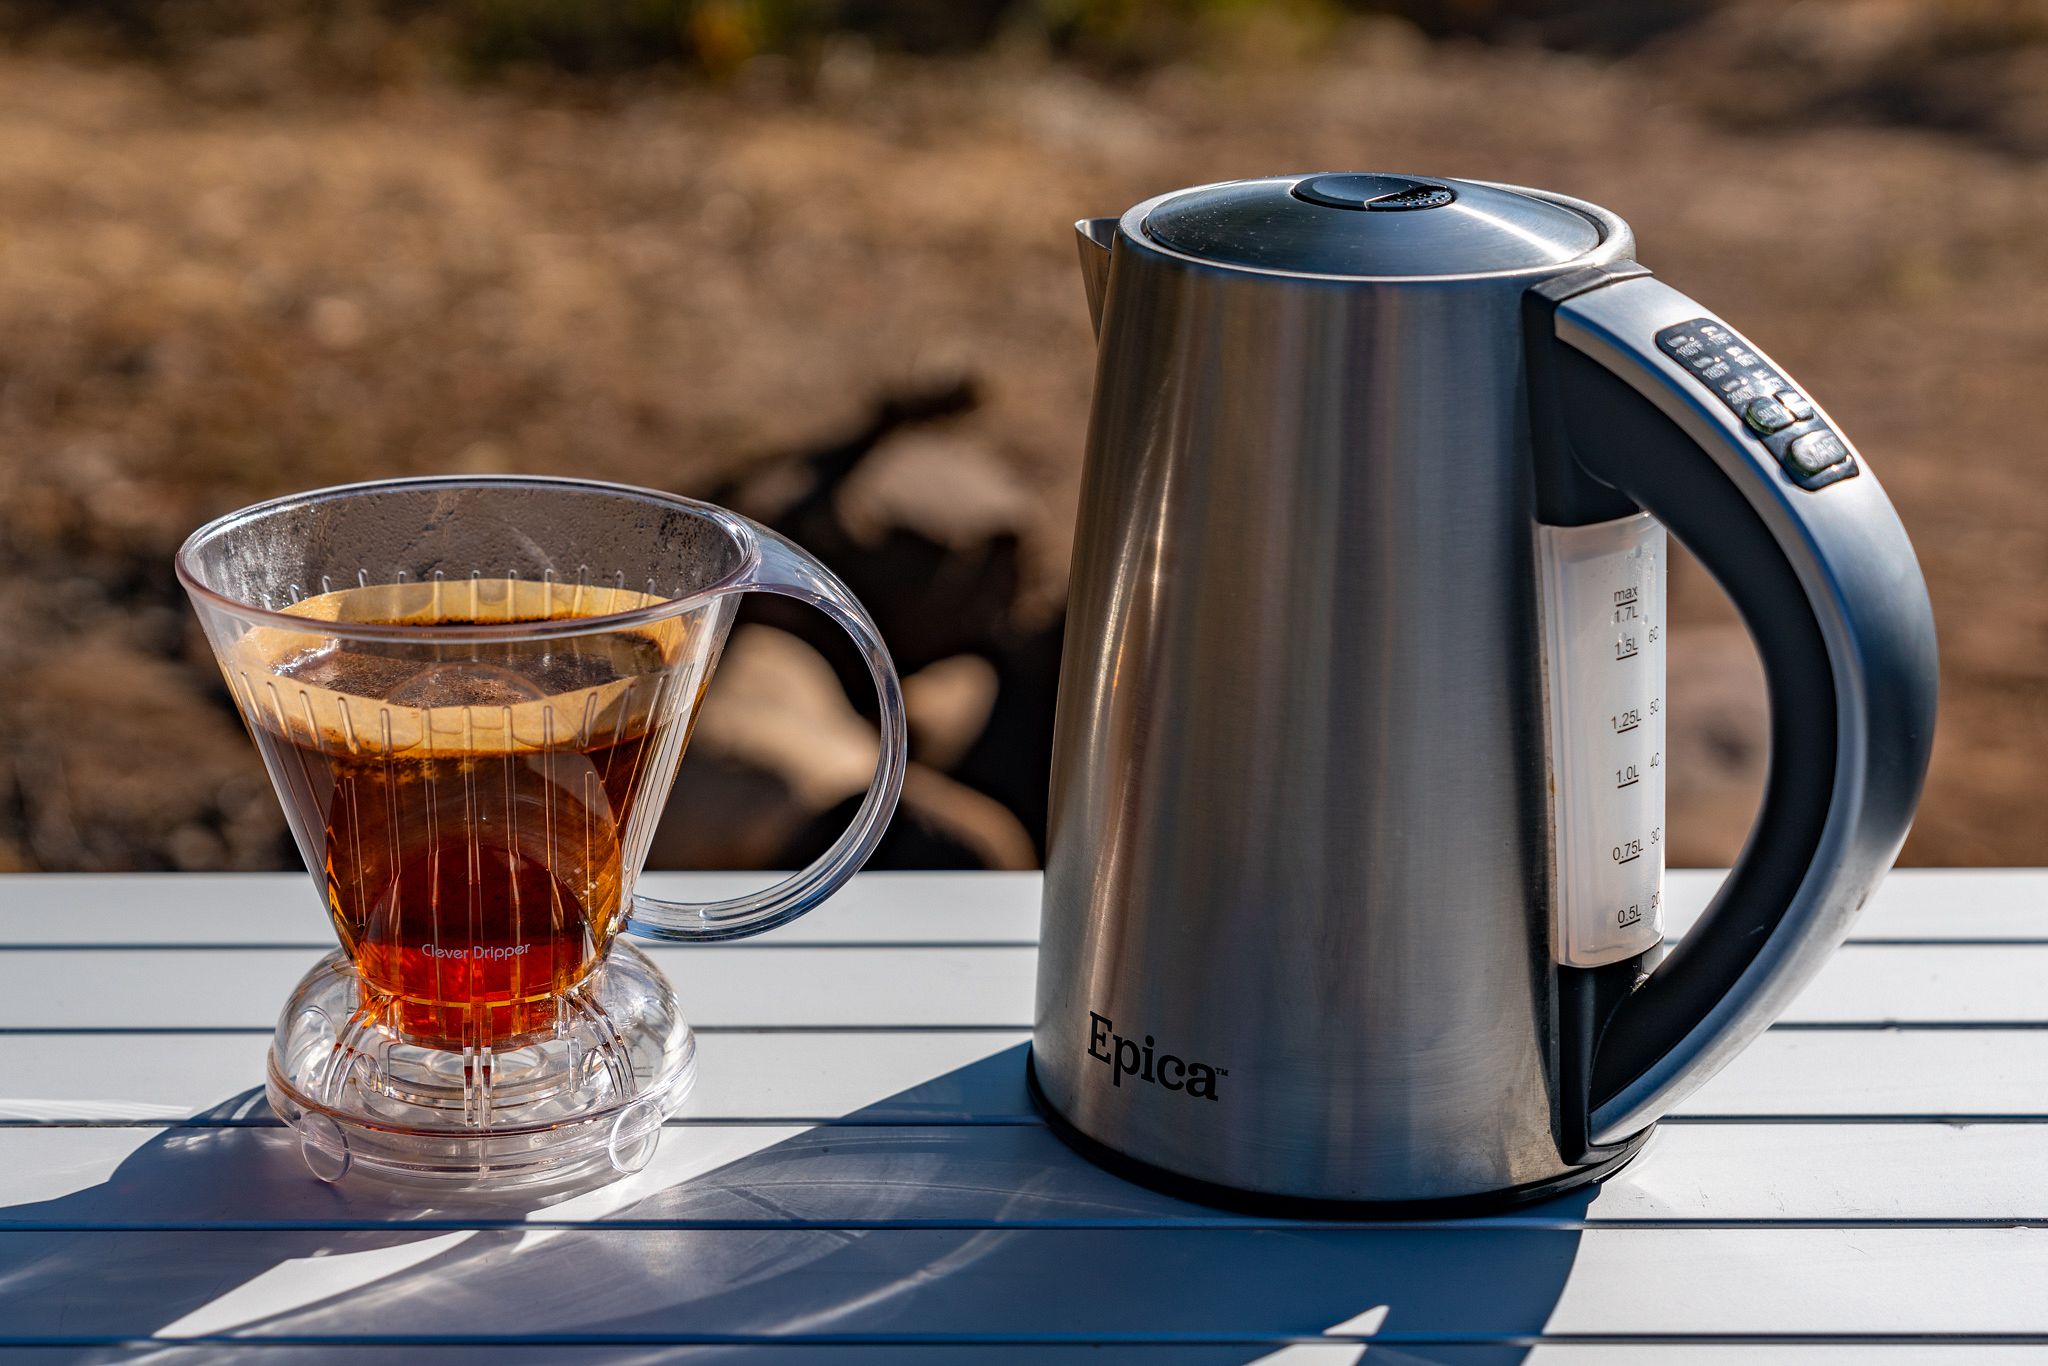 Epica Stainless Steel Electric Kettle Coffee Hot Water Maker